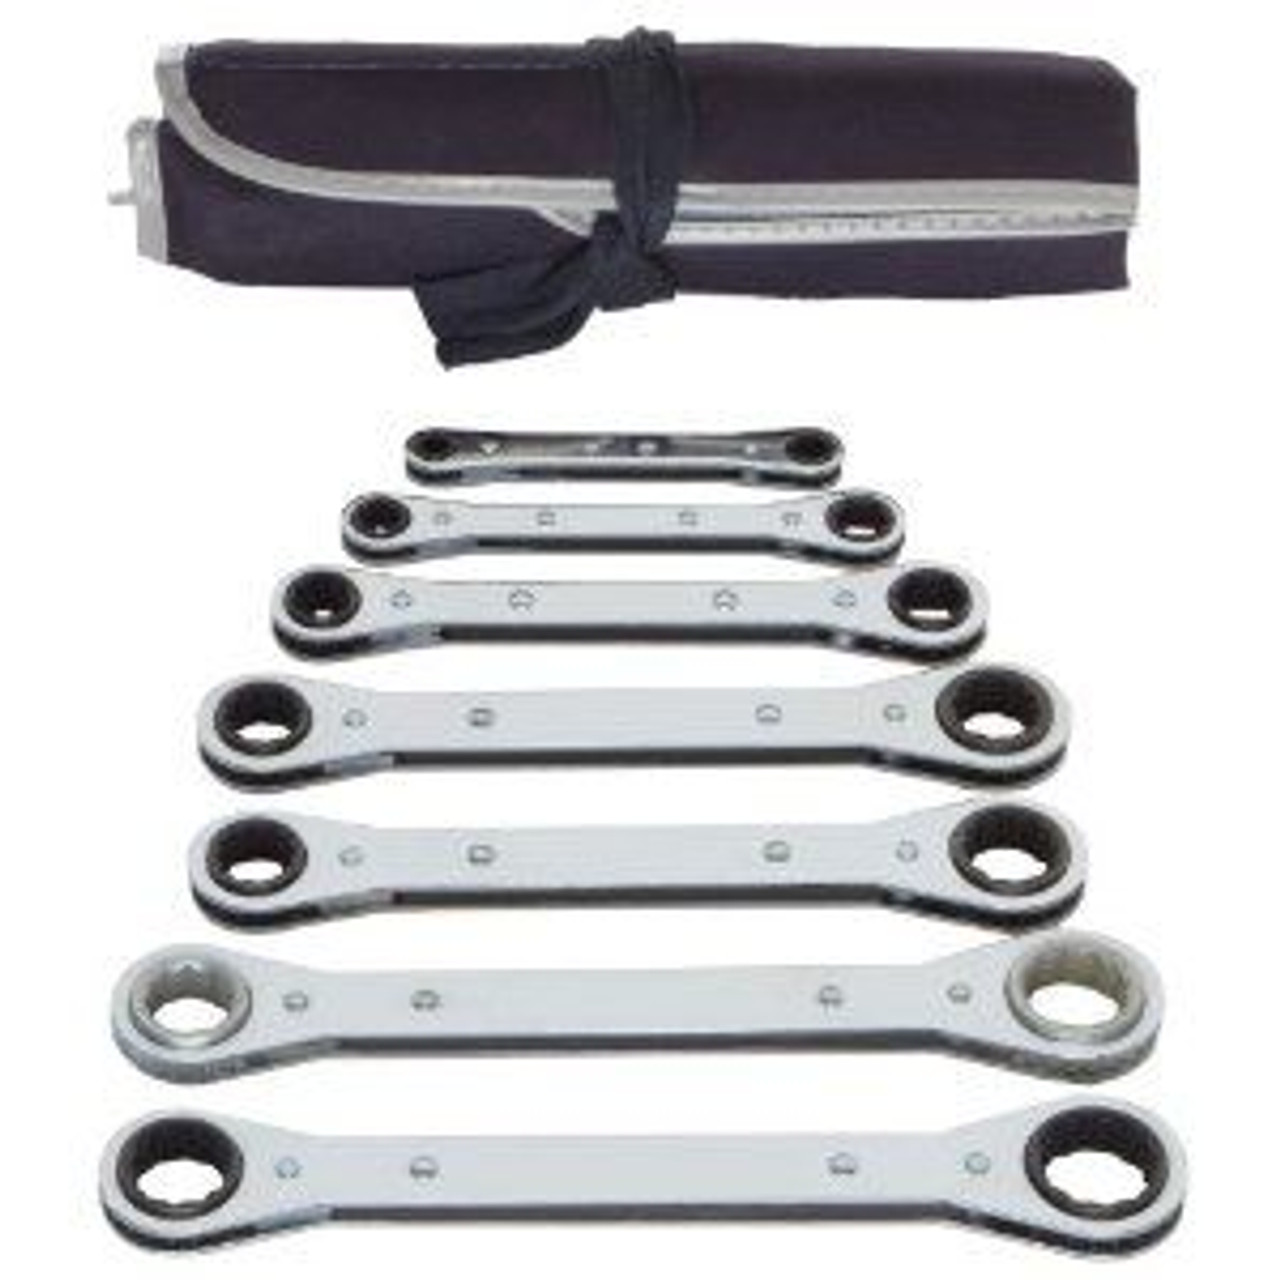 Combination Spanner Price Starting From Rs 171/Unit. Find Verified Sellers  in Valsad - JdMart